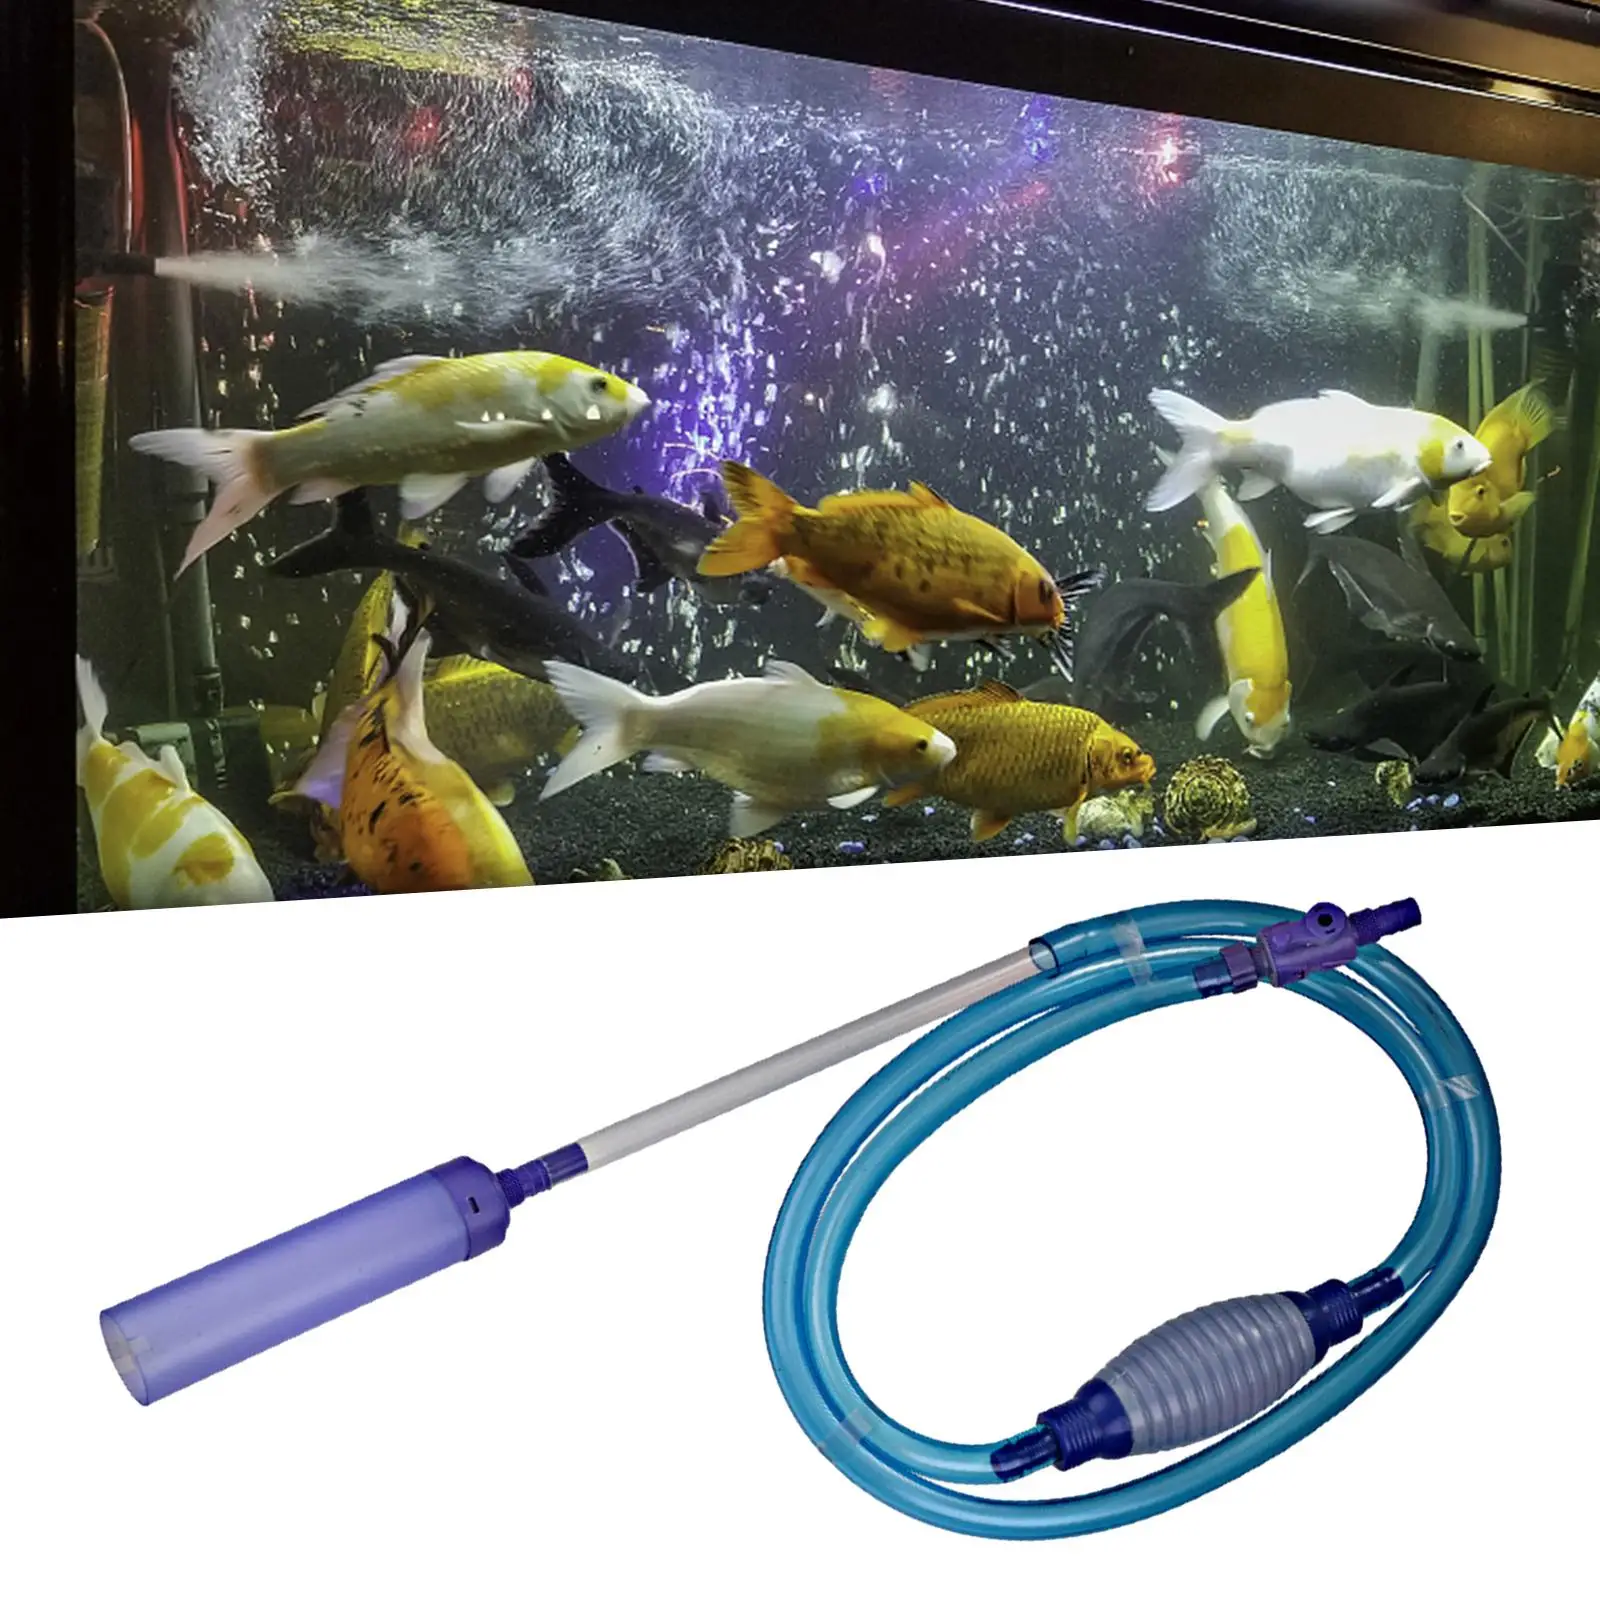 Fish Tank Water Change Vacuum Gravel Cleaner Portable Handheld Sand Cleaner for Sand Cleaning Fish Tank Water Changing Accessory